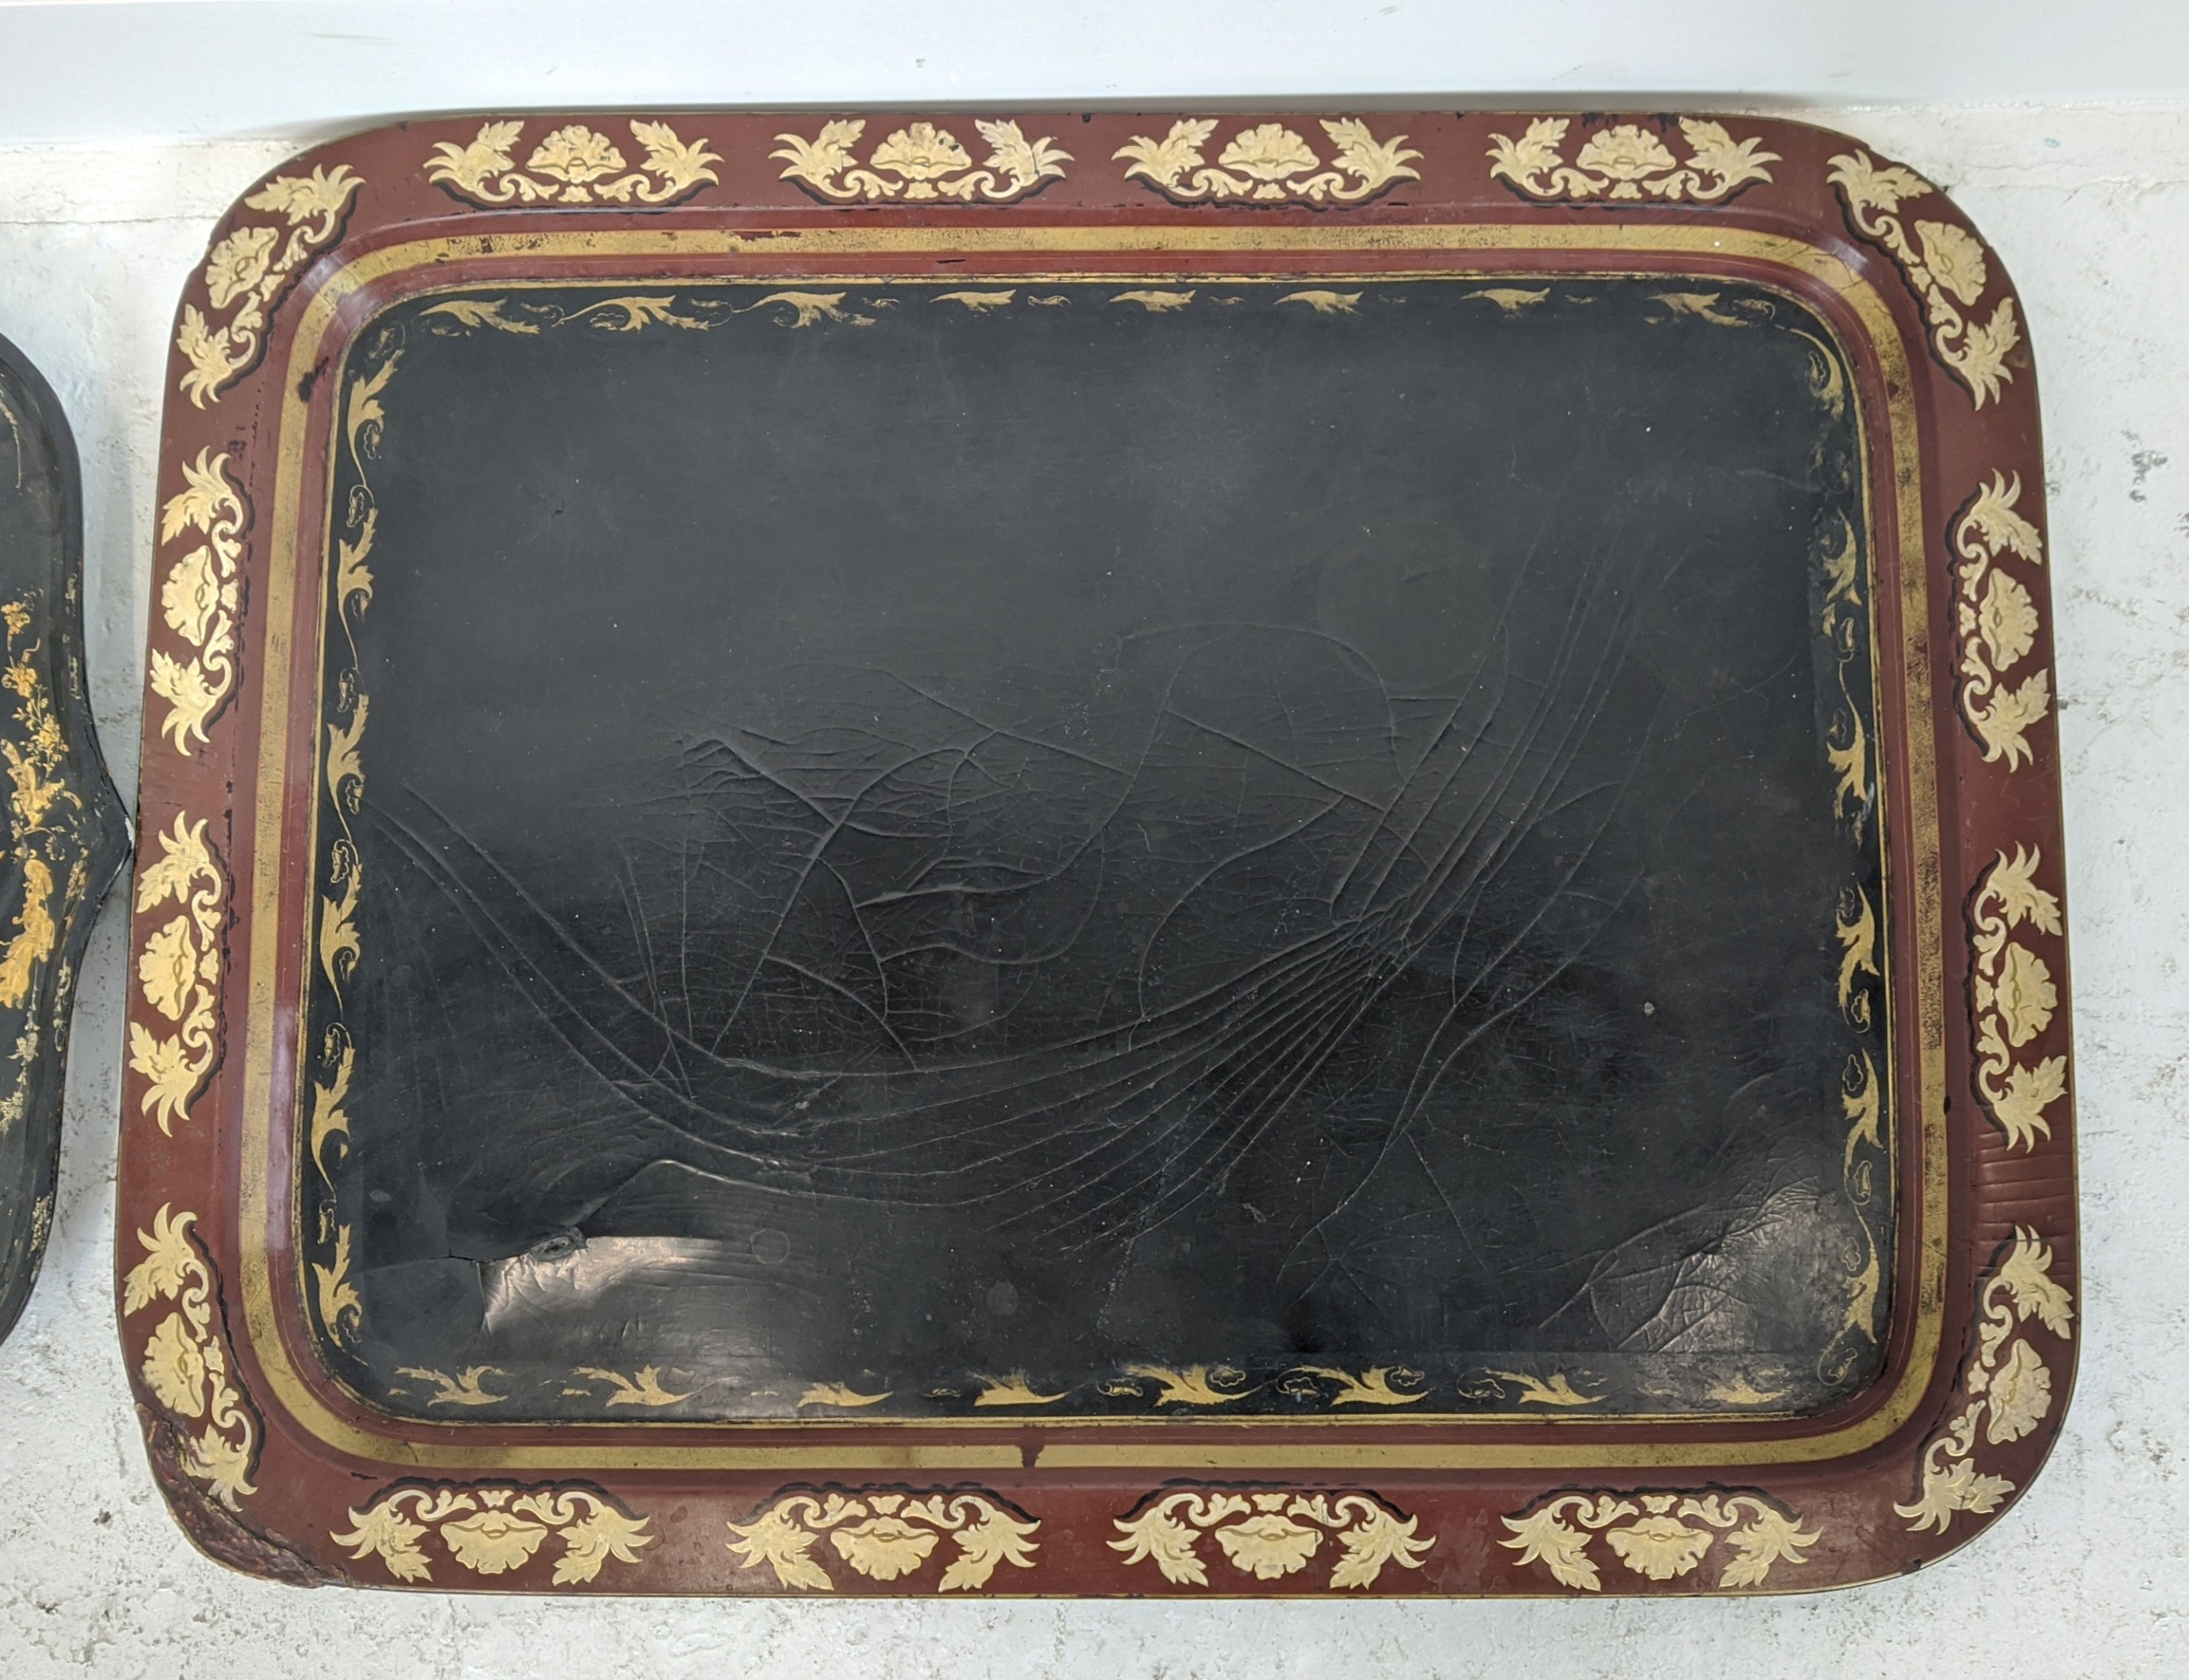 TRAY, Regency papier mache with scalloped border stamped Clay, 'King Street', Covent Garden, 80cm - Image 6 of 12